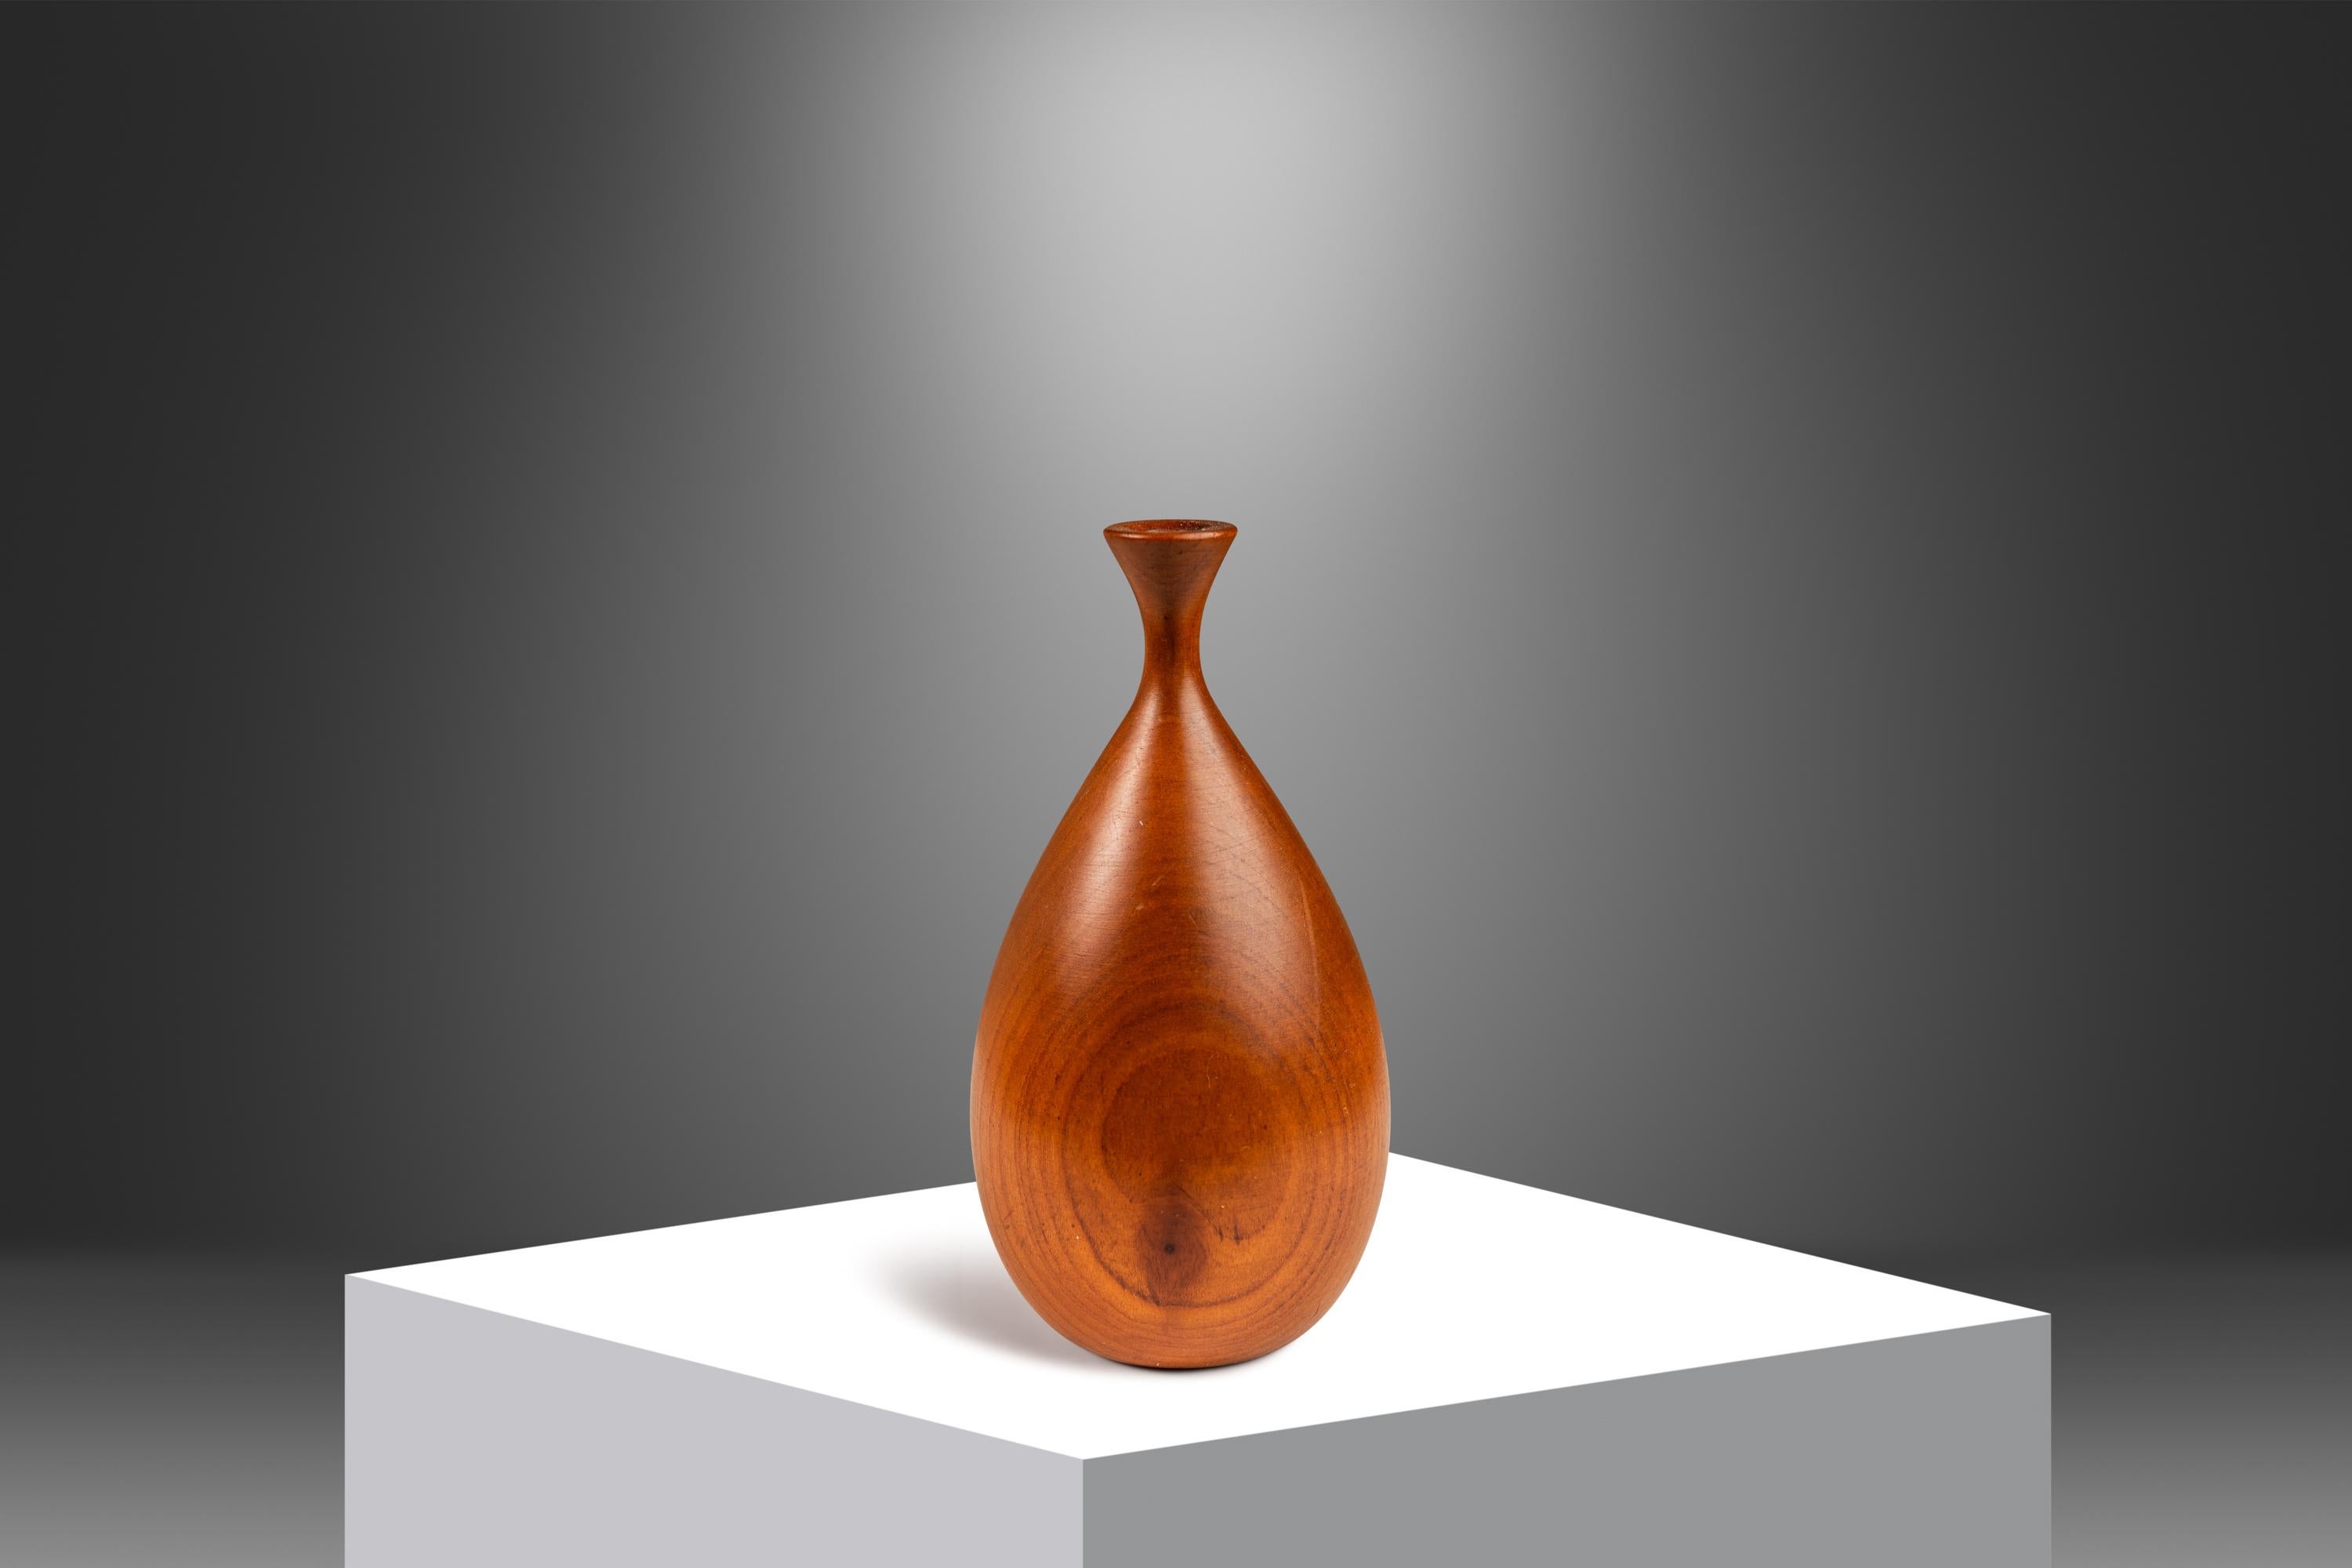 Mid-Century Modern Signed Petite Wood-Turned Vase in solid Walnut by George Biersdorf, USA, c. 1979 For Sale